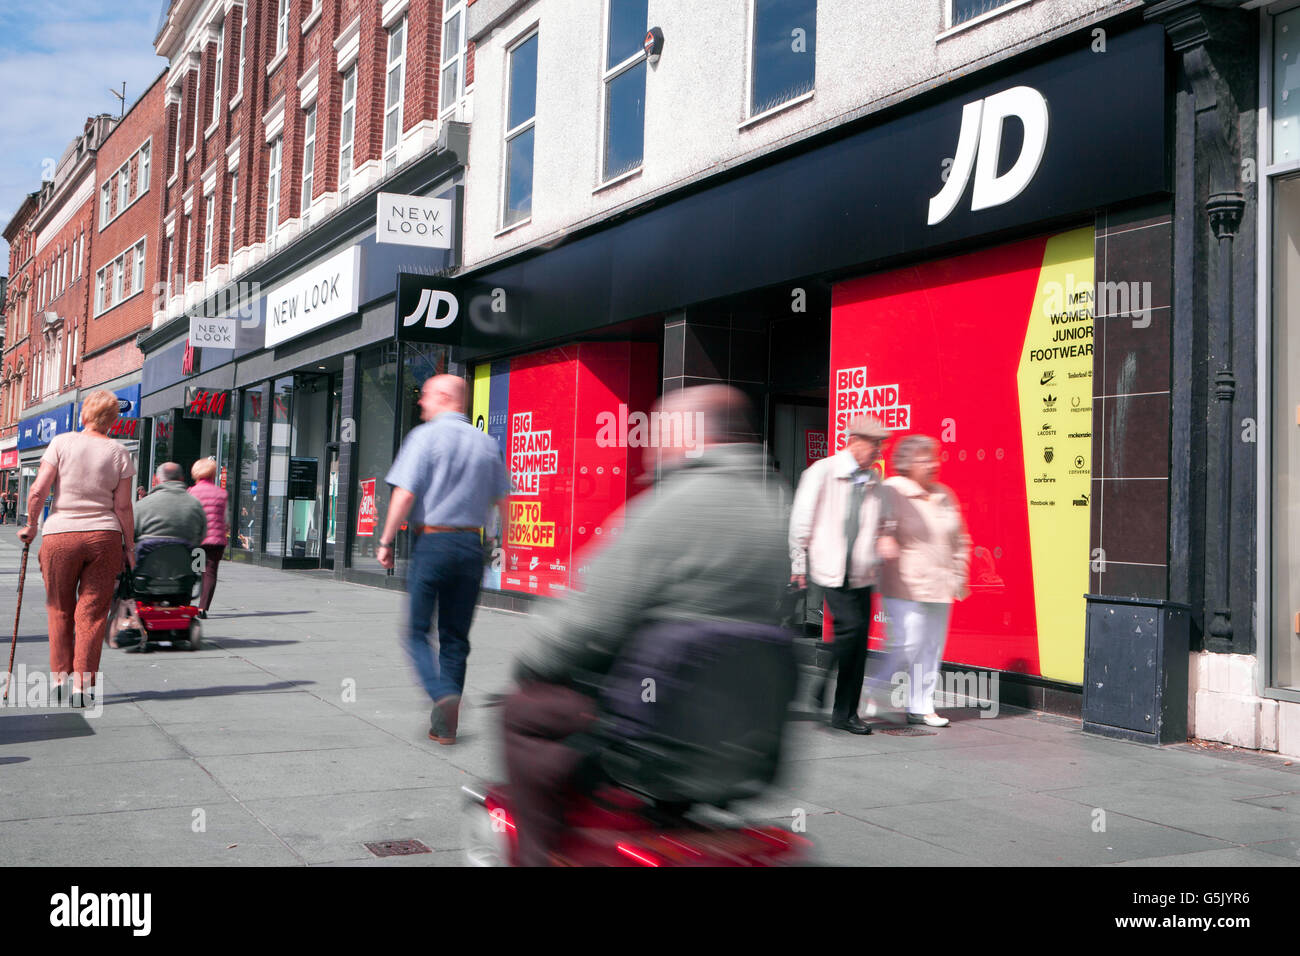 JD Sports  Shops and Shoppers in the retail sector of the  Victorian Town of Southport, in Merseyside, UK Stock Photo